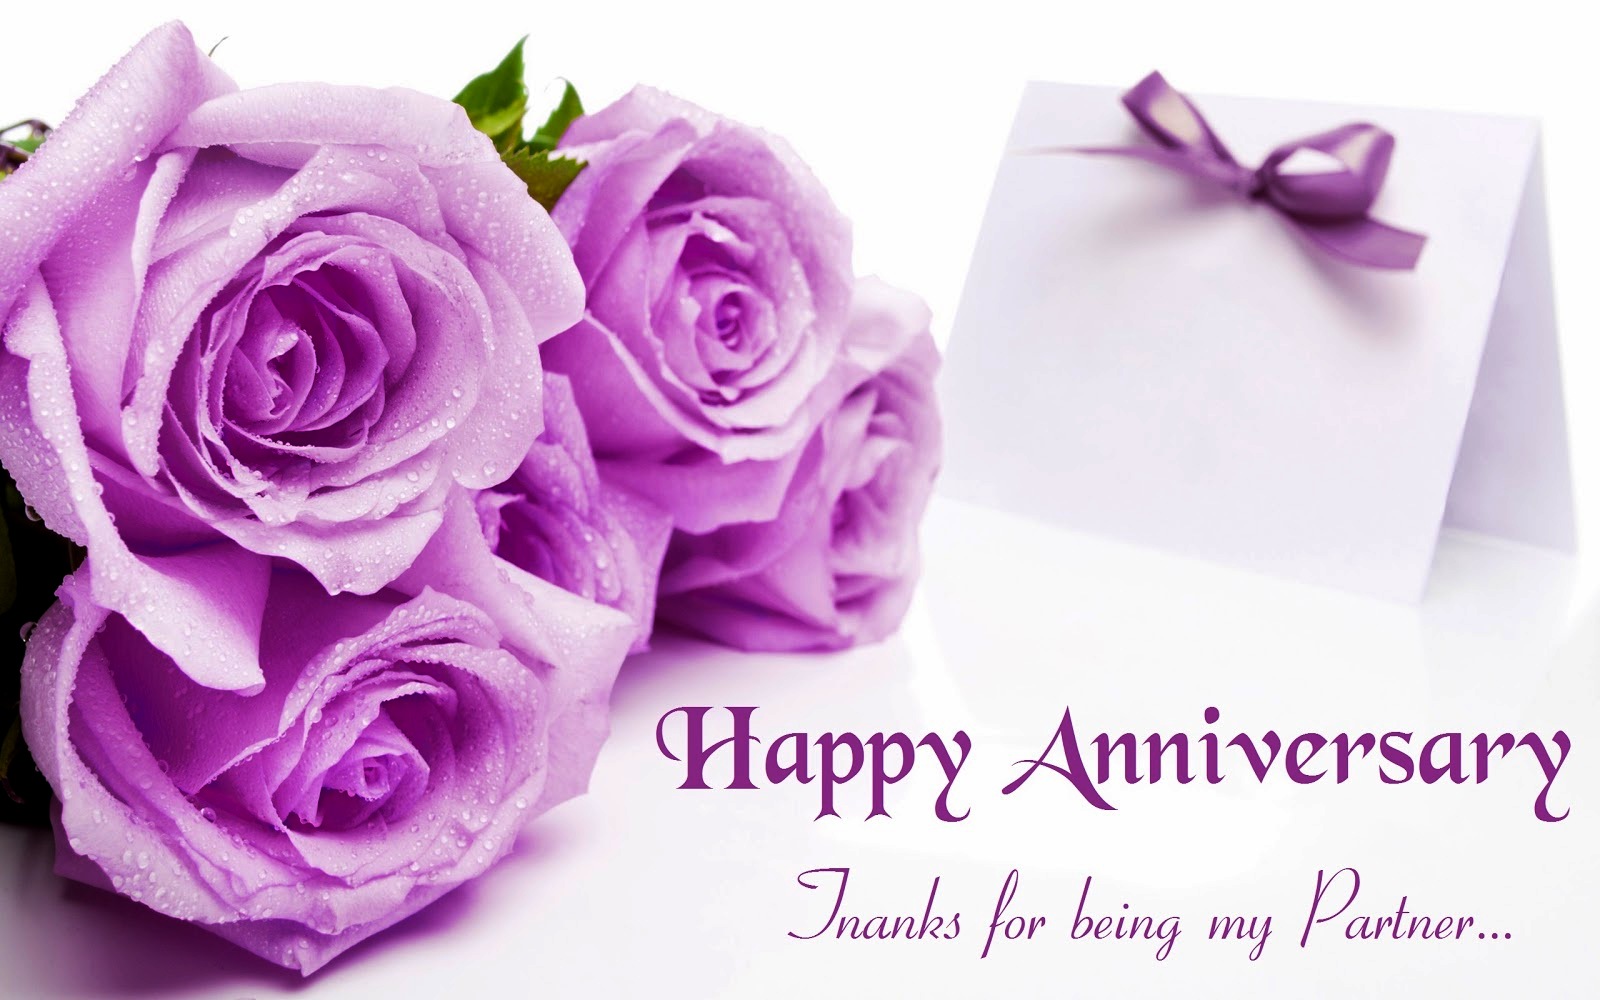 Free download 1st wedding anniversary wishes wallpaper Toptenpackcom [1600x1000] for your Desktop, Mobile & Tablet. Explore Wedding Anniversary Wallpaper. Happy Anniversary Wallpaper, Anniversary Wallpaper Image